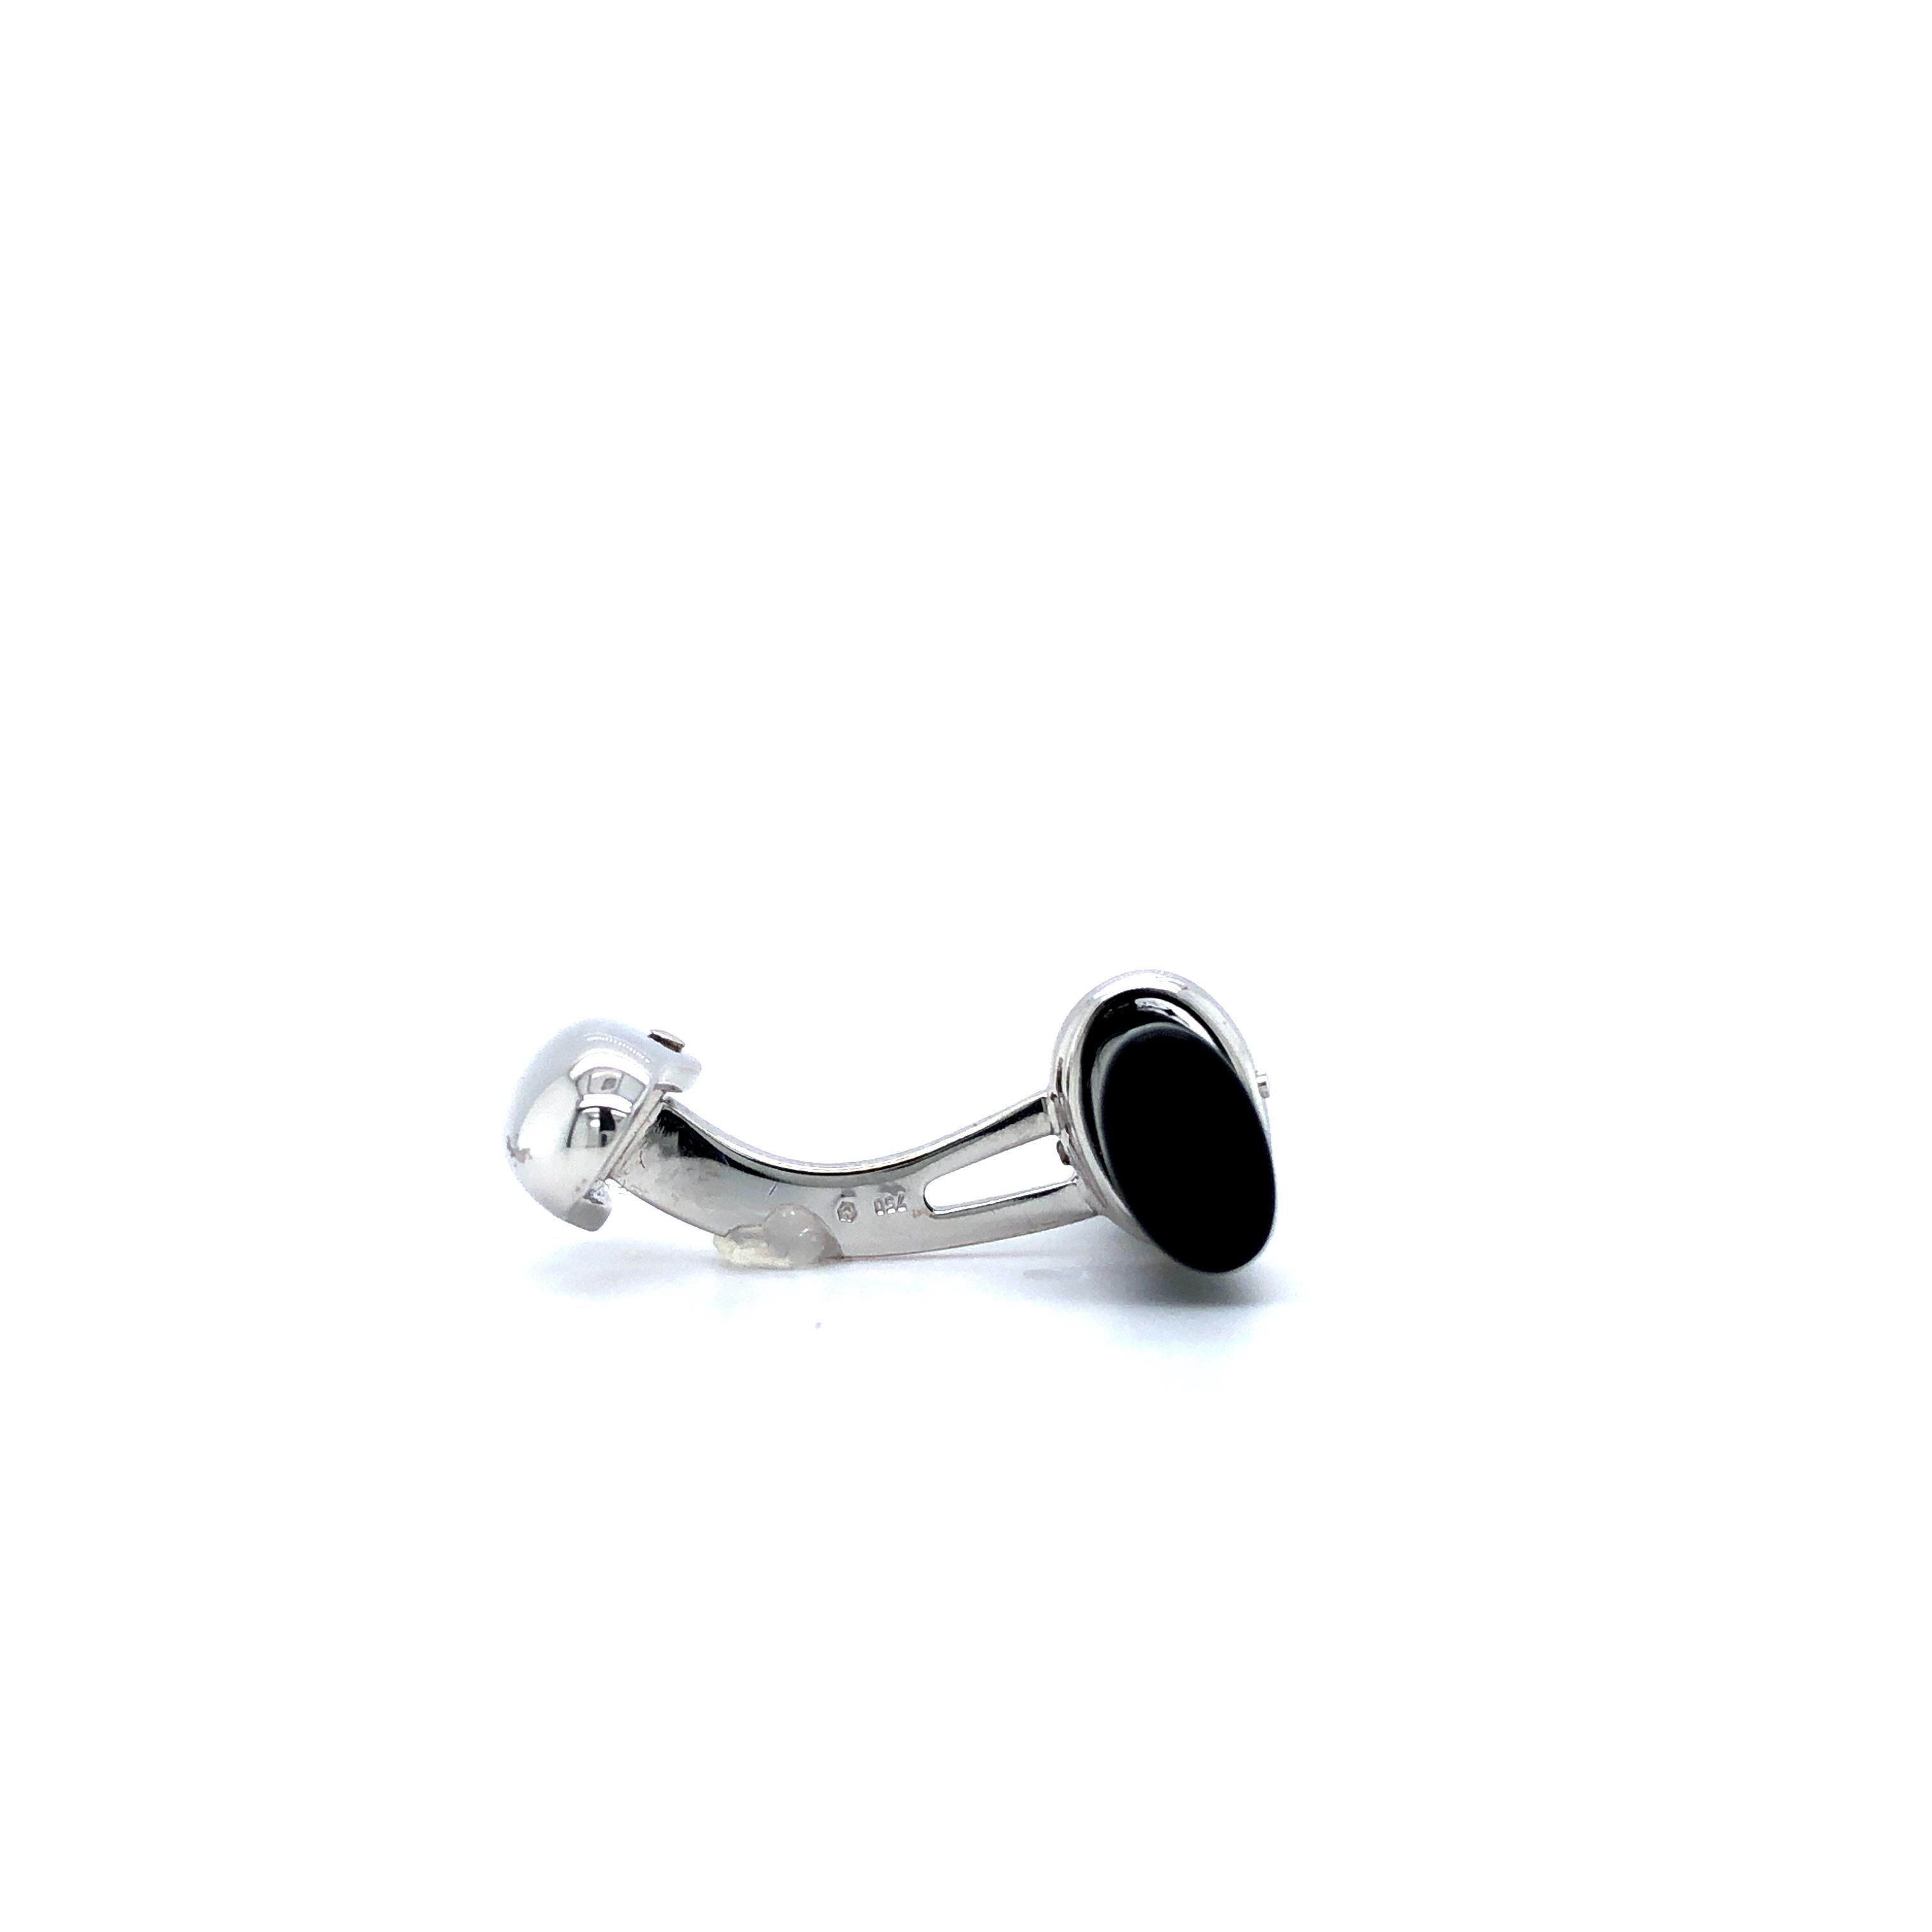 Contemporary Art Deco Style Cufflinks with Cylindrical Black Onyx Bars, 18k White Gold For Sale